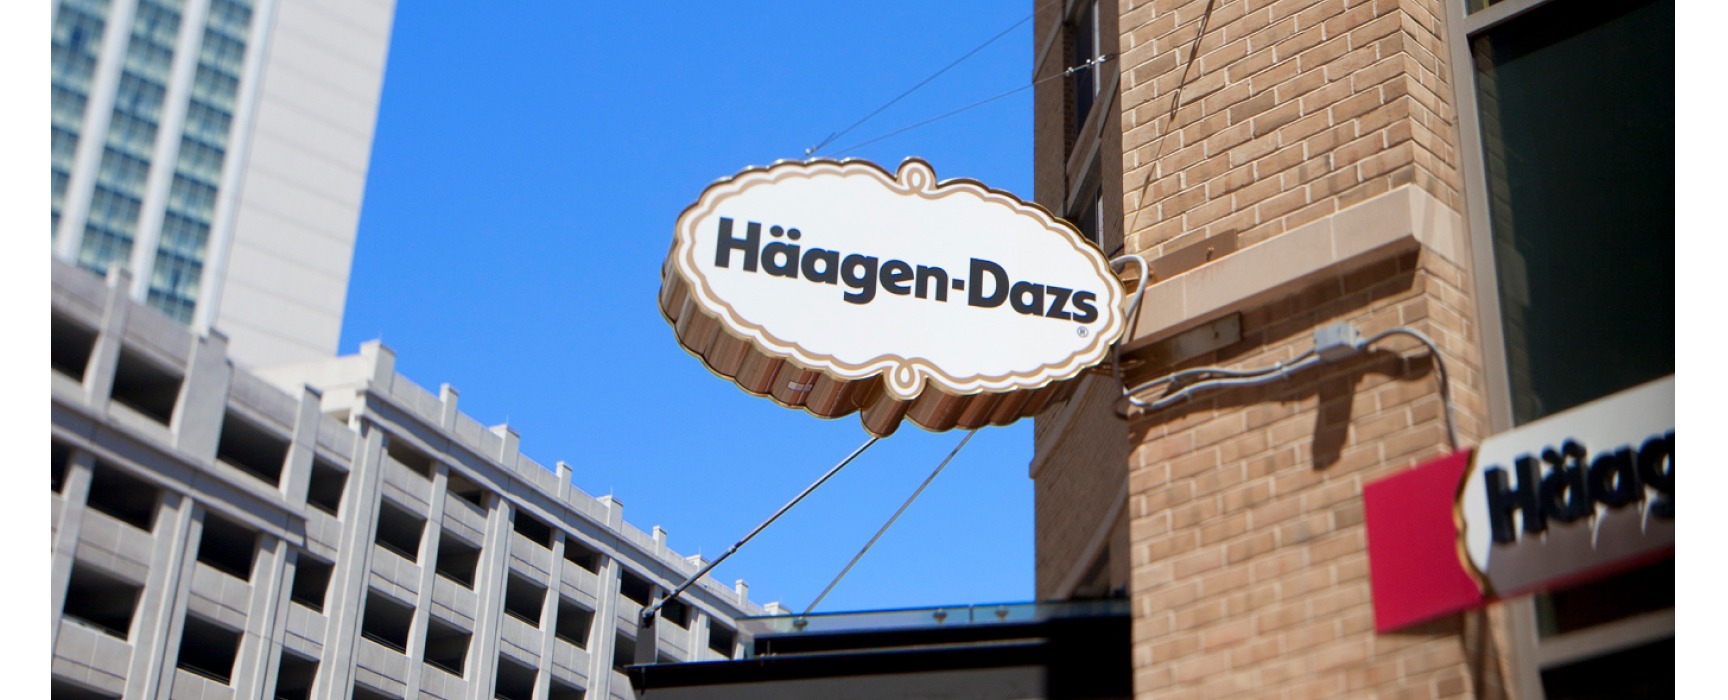 Haagen Daaz brick storefront with store sign hanging over black awning in city